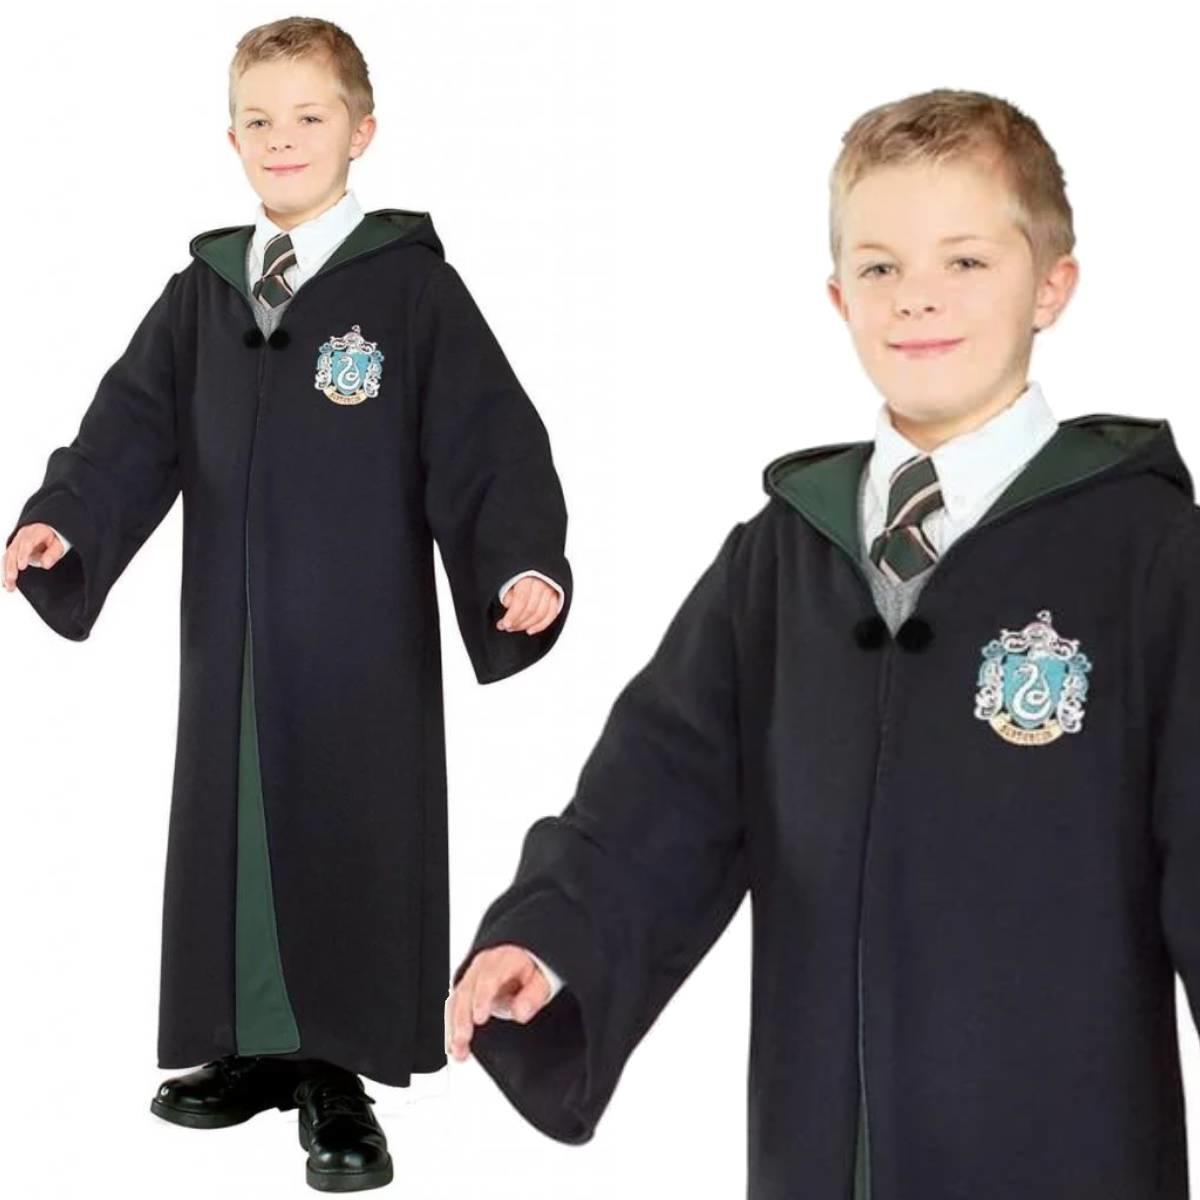 Deluxe Slytherin Fancy Dress Costume for children by Rubies 888258 available here from our Harry Potter range at Karnival Costumes online party shop